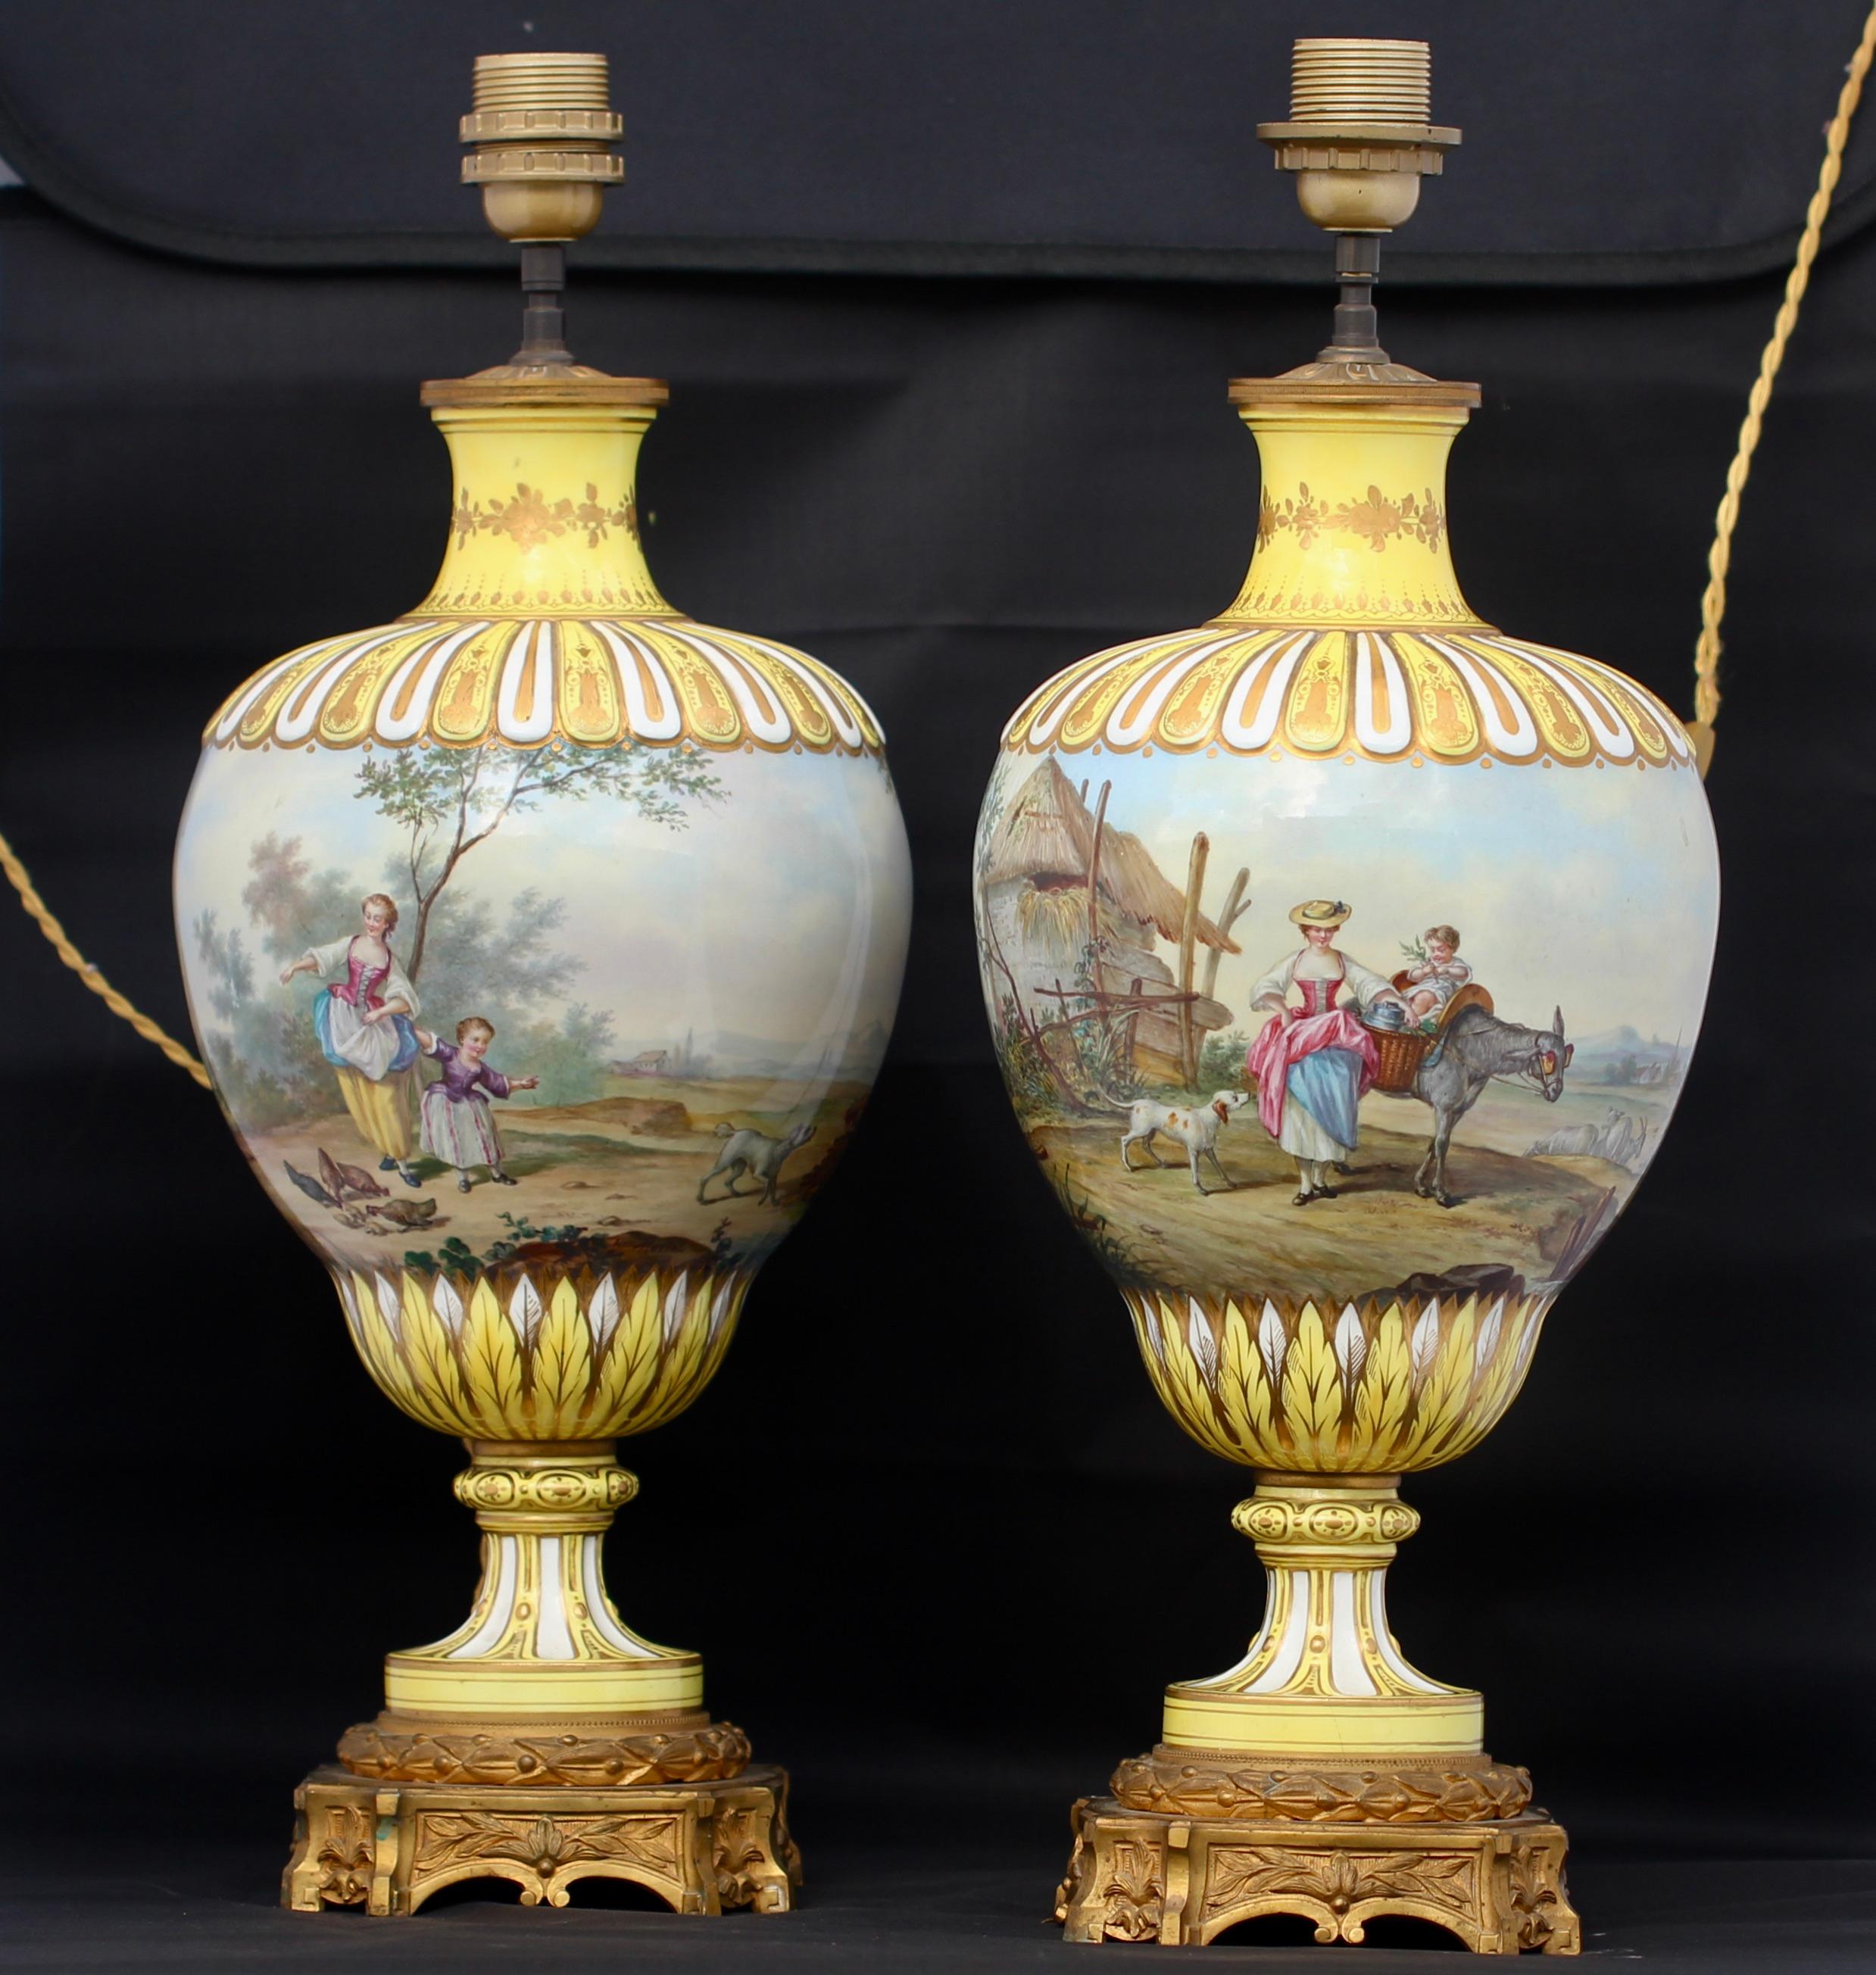 Pair of Napoléon III polychromed Paris Porcelain baluster vases ormolu-mounted in lamps
pastoral scenes hand painted all around on a yellow and gold ground
Louis XVI style,
circa 1880
Electrified.
 